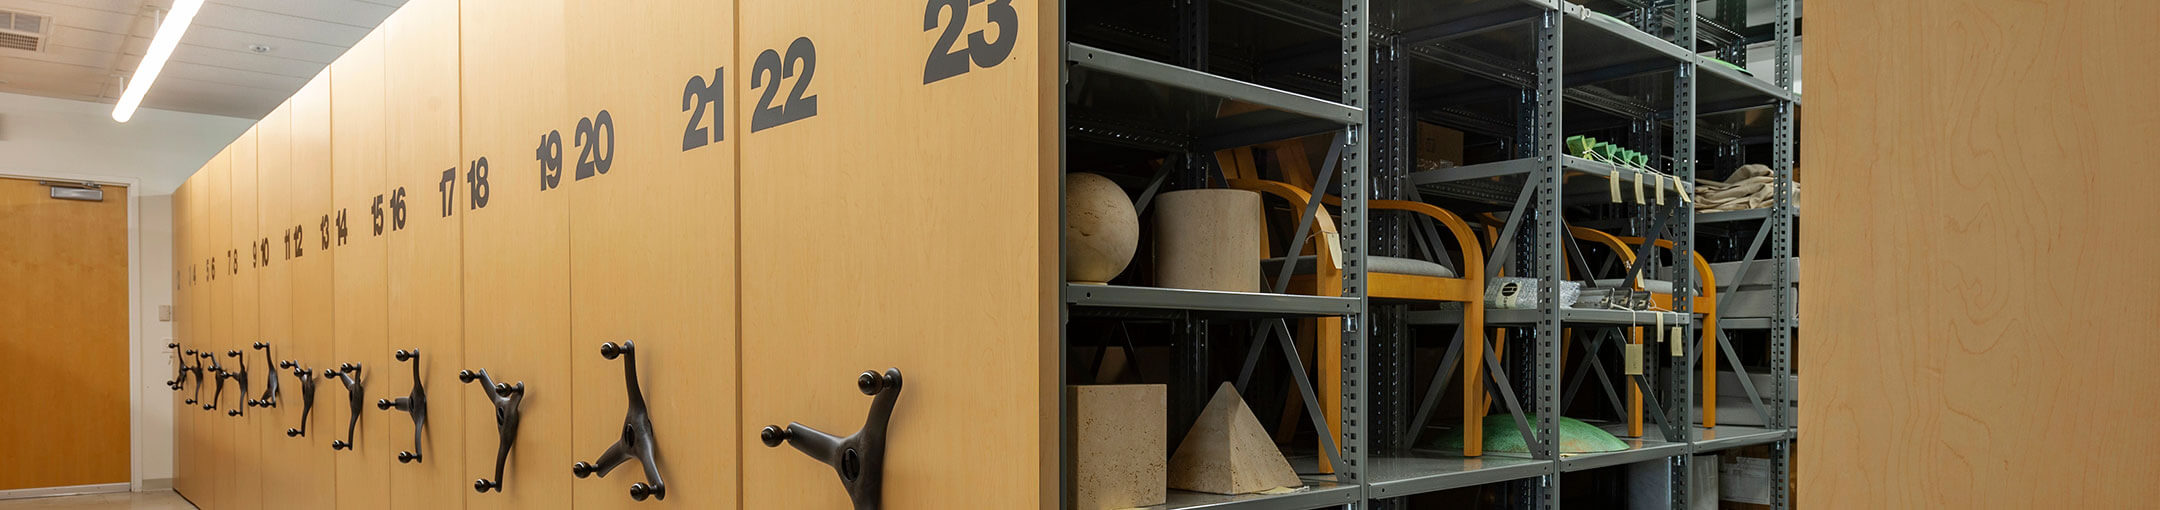 Hangers and shelving units used to store archives.